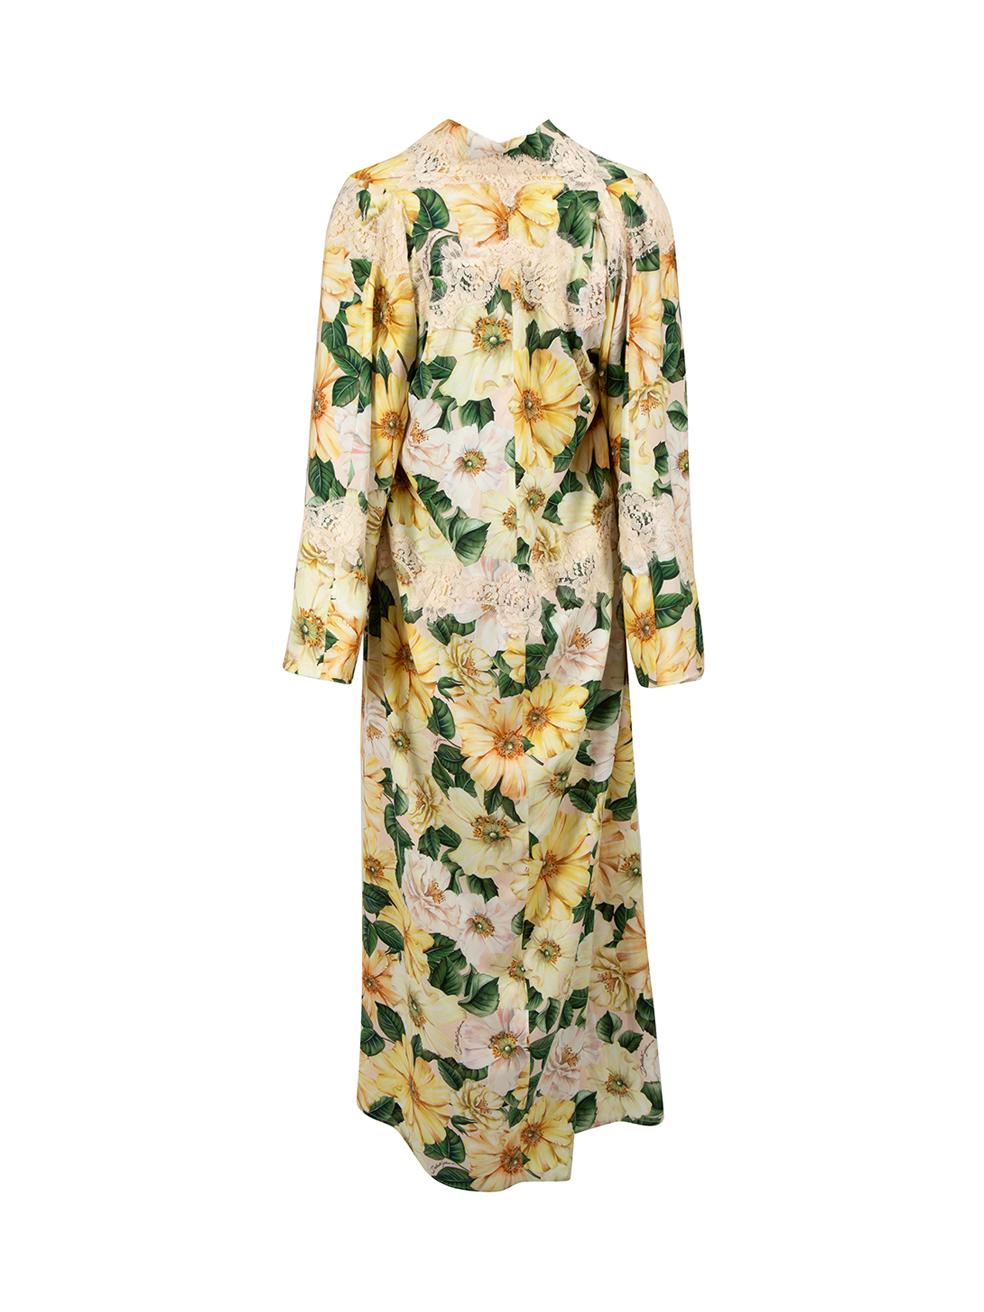 Dolce & Gabbana Yellow Silk Camellia Caftan Dress Size S In Good Condition For Sale In London, GB